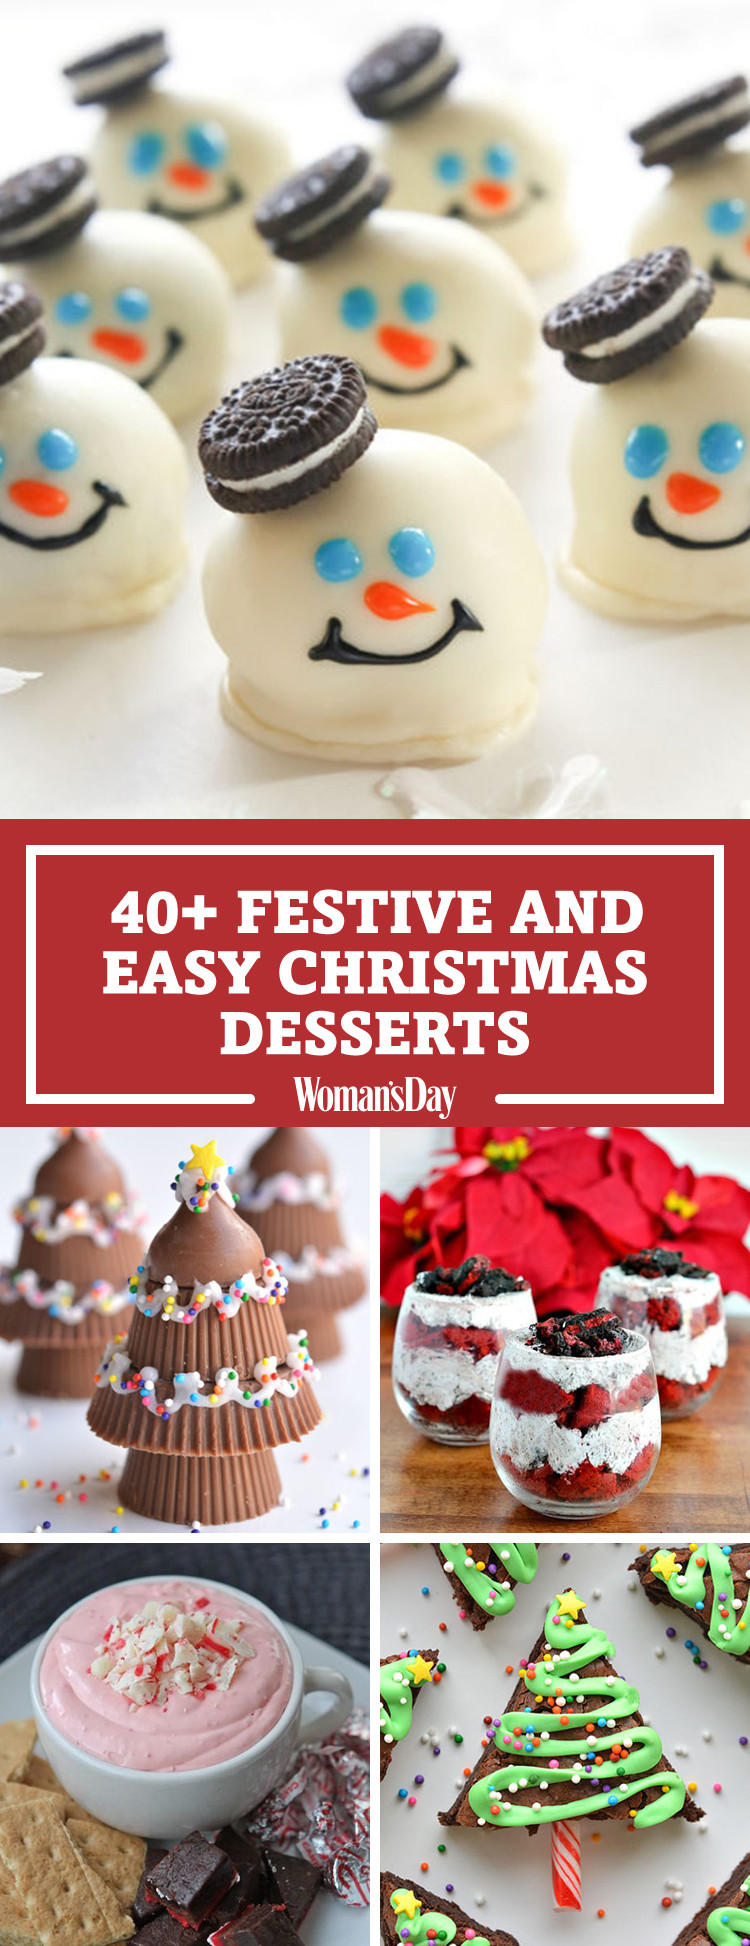 Easy Holiday Desserts For Parties
 57 Easy Christmas Dessert Recipes Best Ideas for Fun